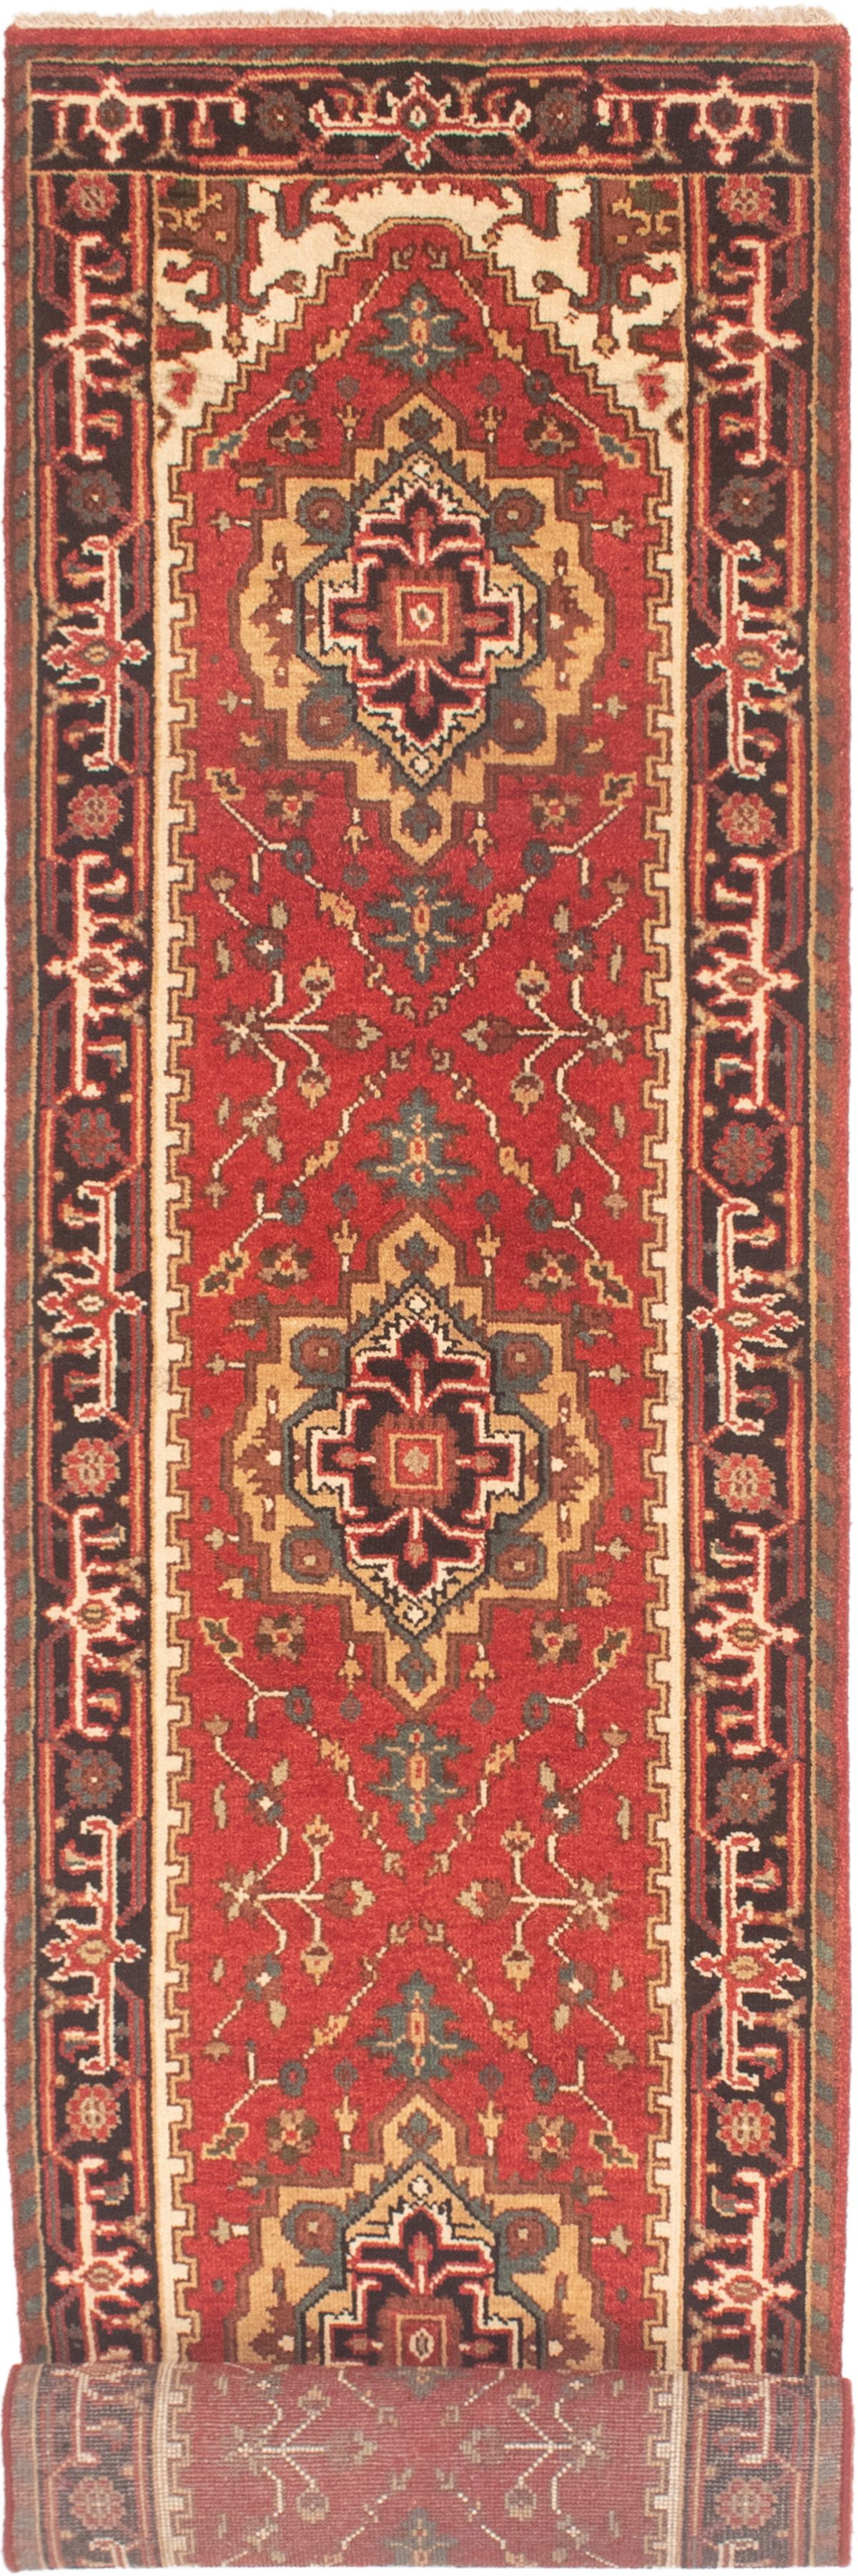 Hand-knotted Serapi Heritage Red Wool Rug 2'7" x 15'7"  Size: 2'7" x 15'7"  